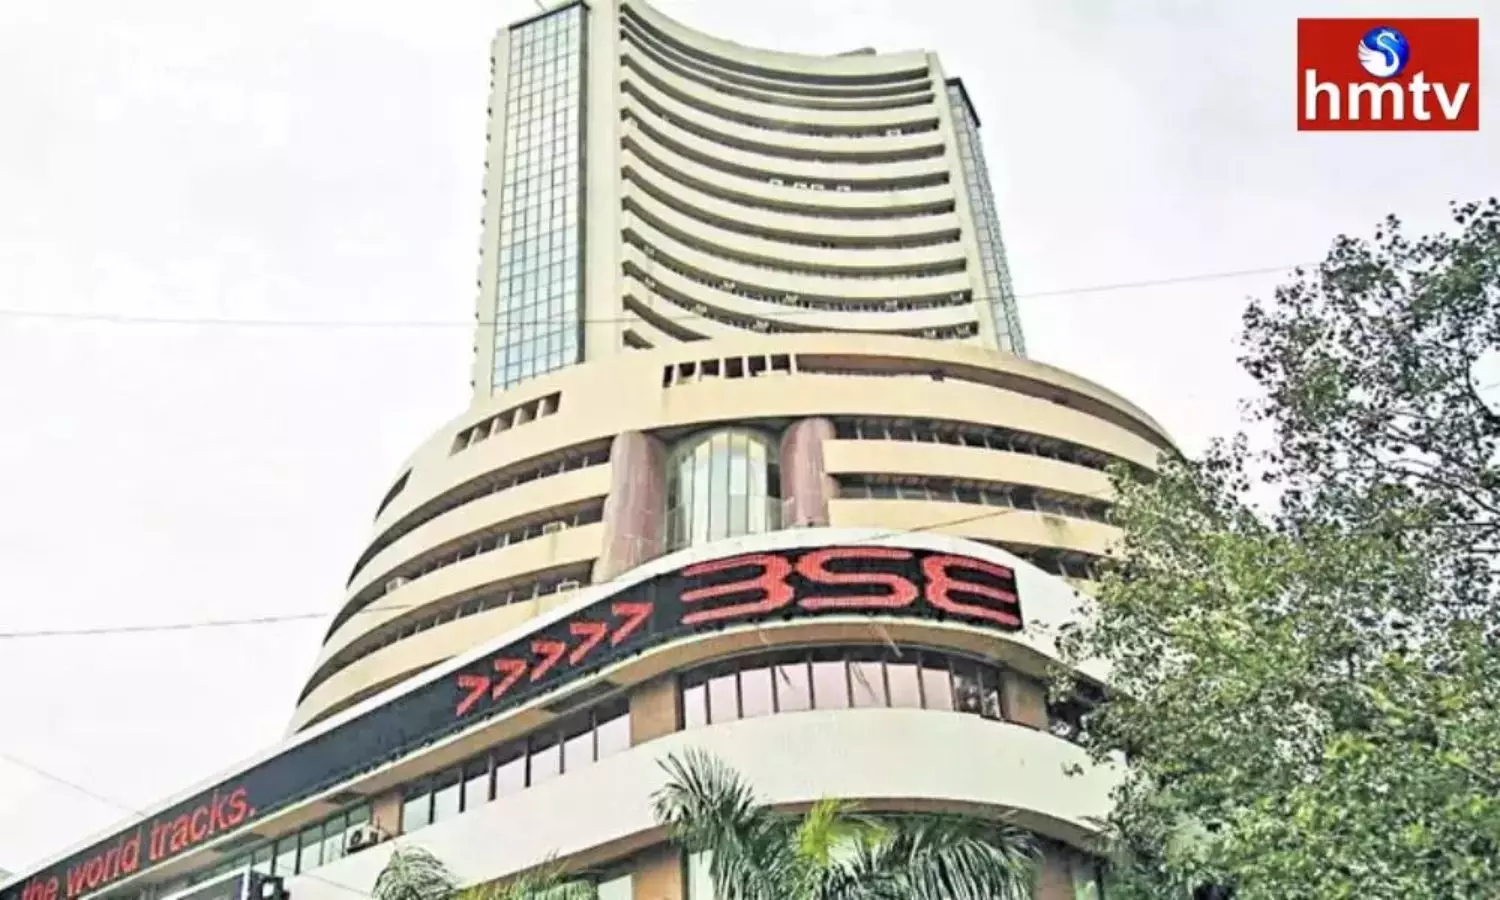 Stock Market Today Sensex Gains Over 150 Points, Nifty50 Settles Above 17300 at Close